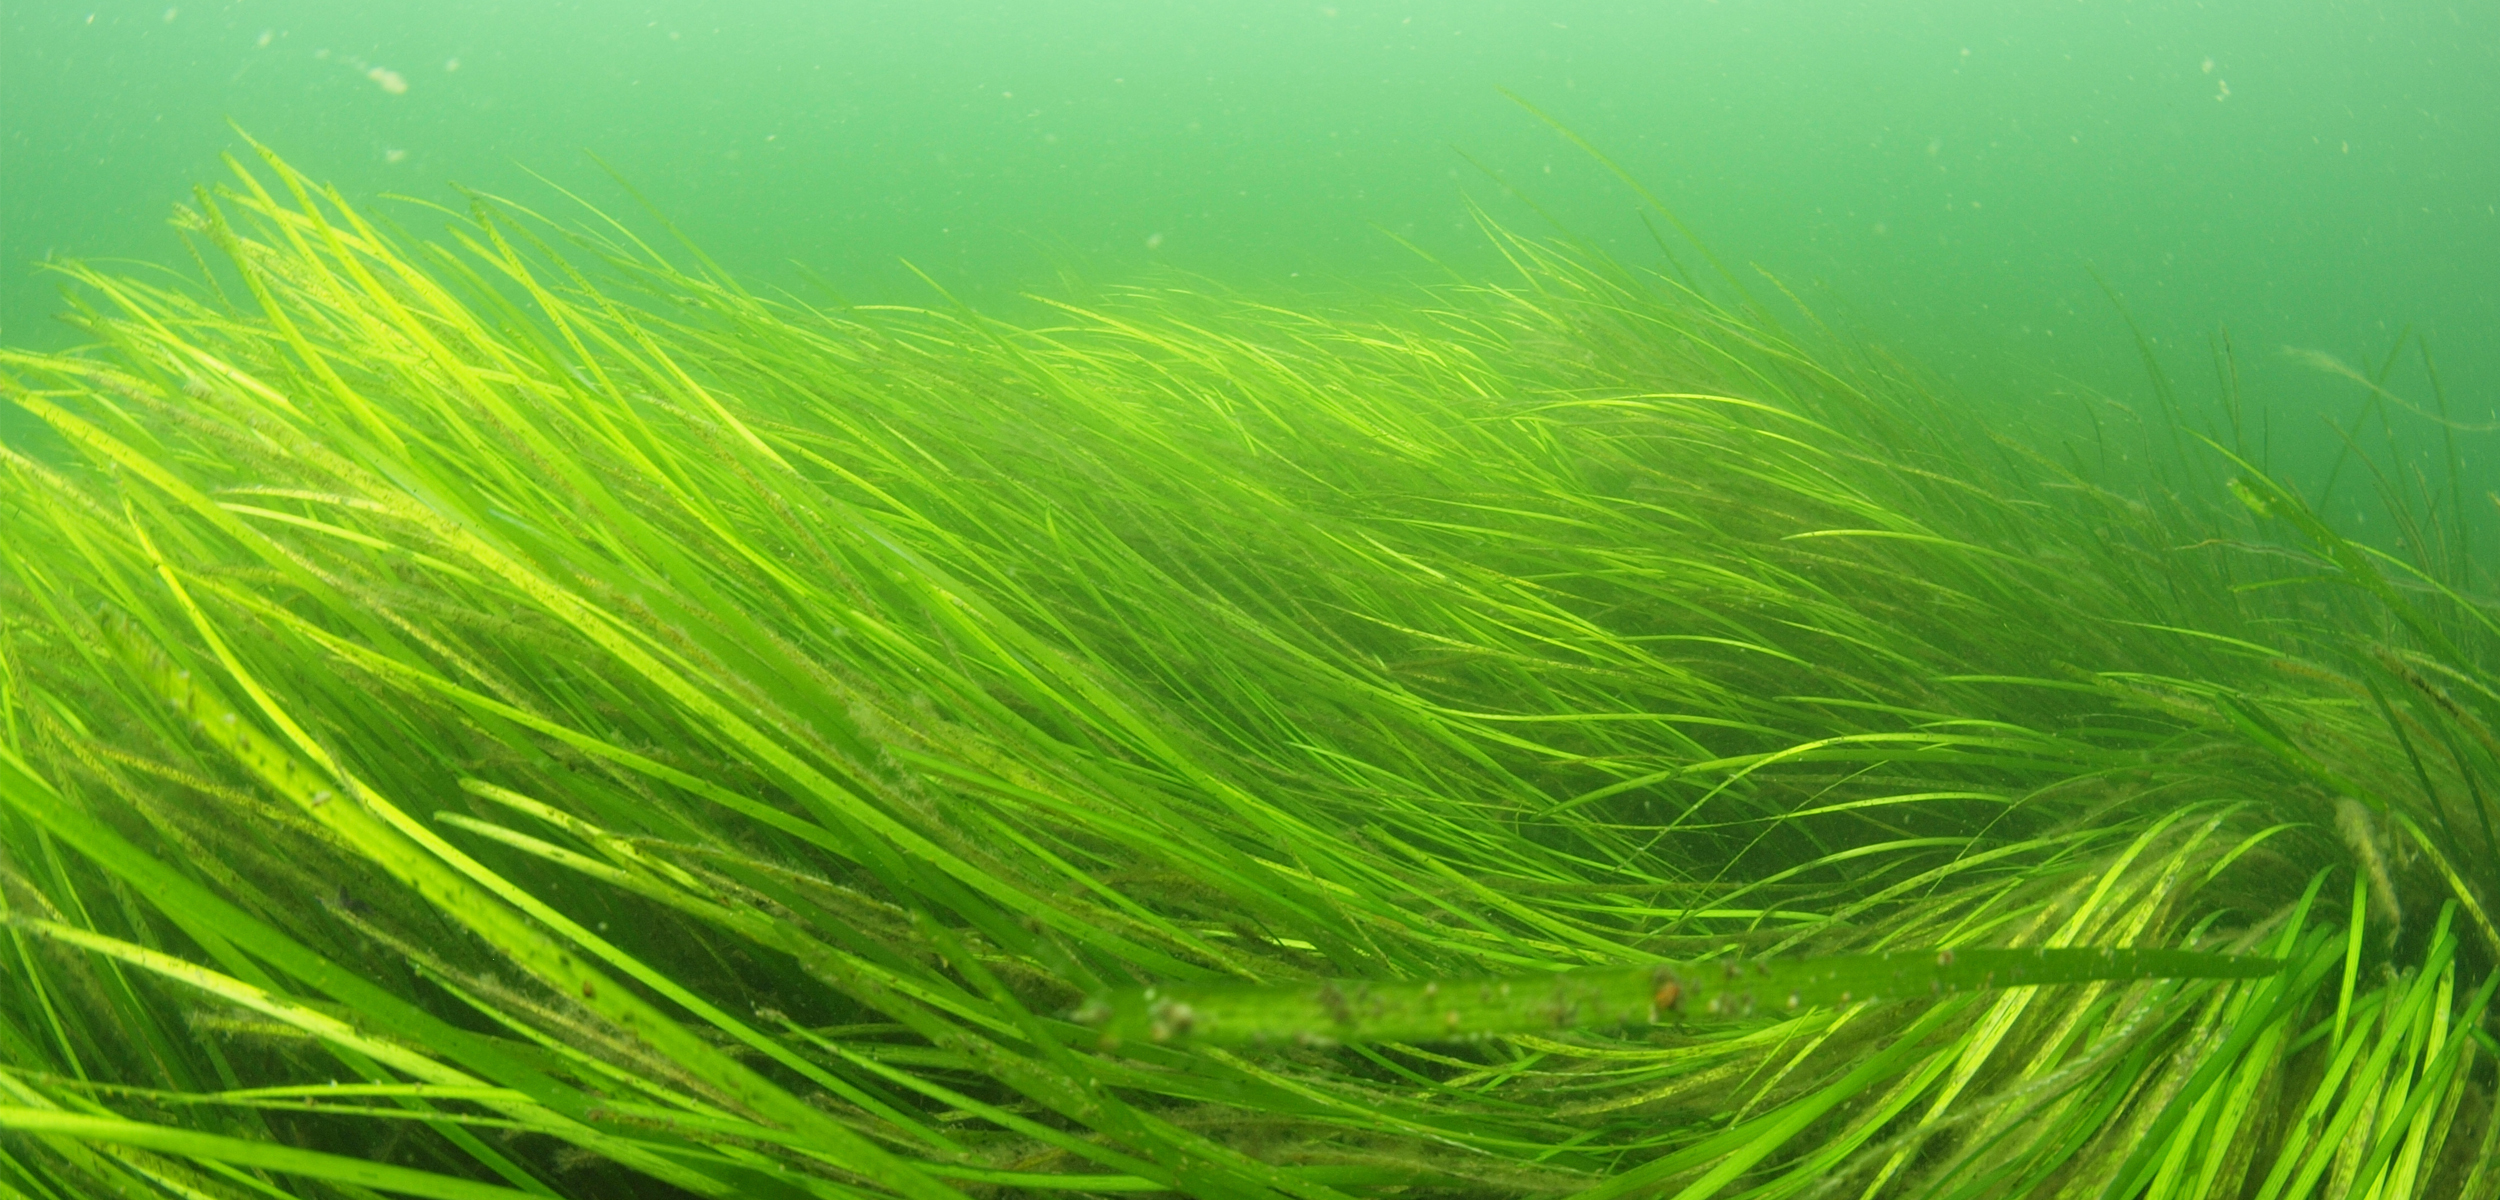 An undersea shot of a green ocean bottom filled with green eelgrass as far as the eye can see.